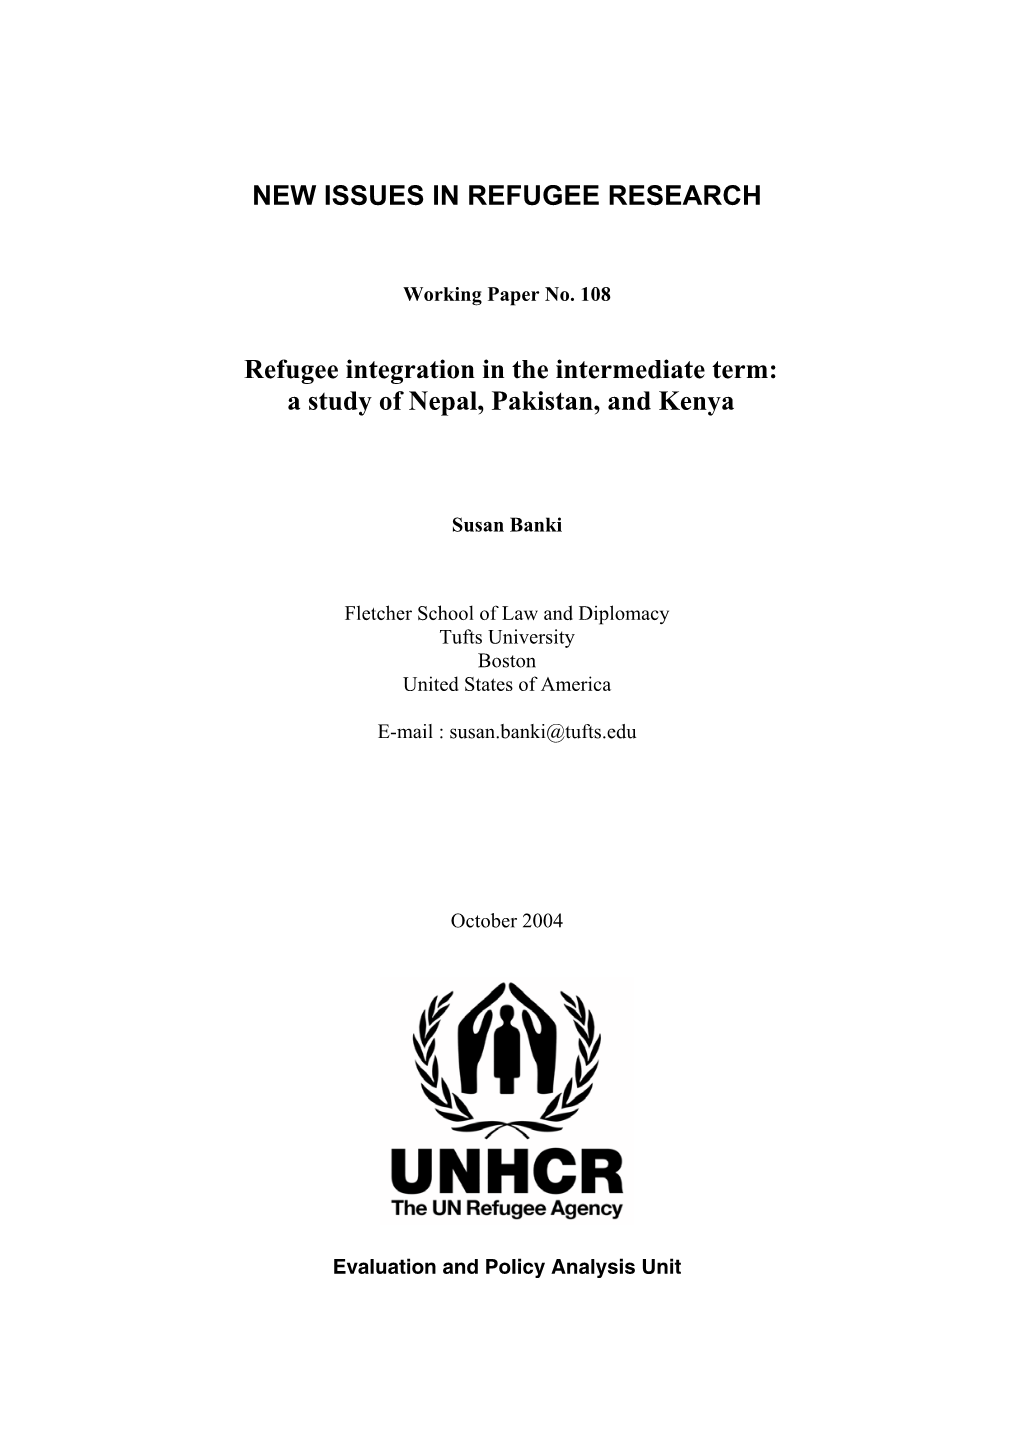 Refugee Integration in the Intermediate Term: a Study of Nepal, Pakistan, and Kenya